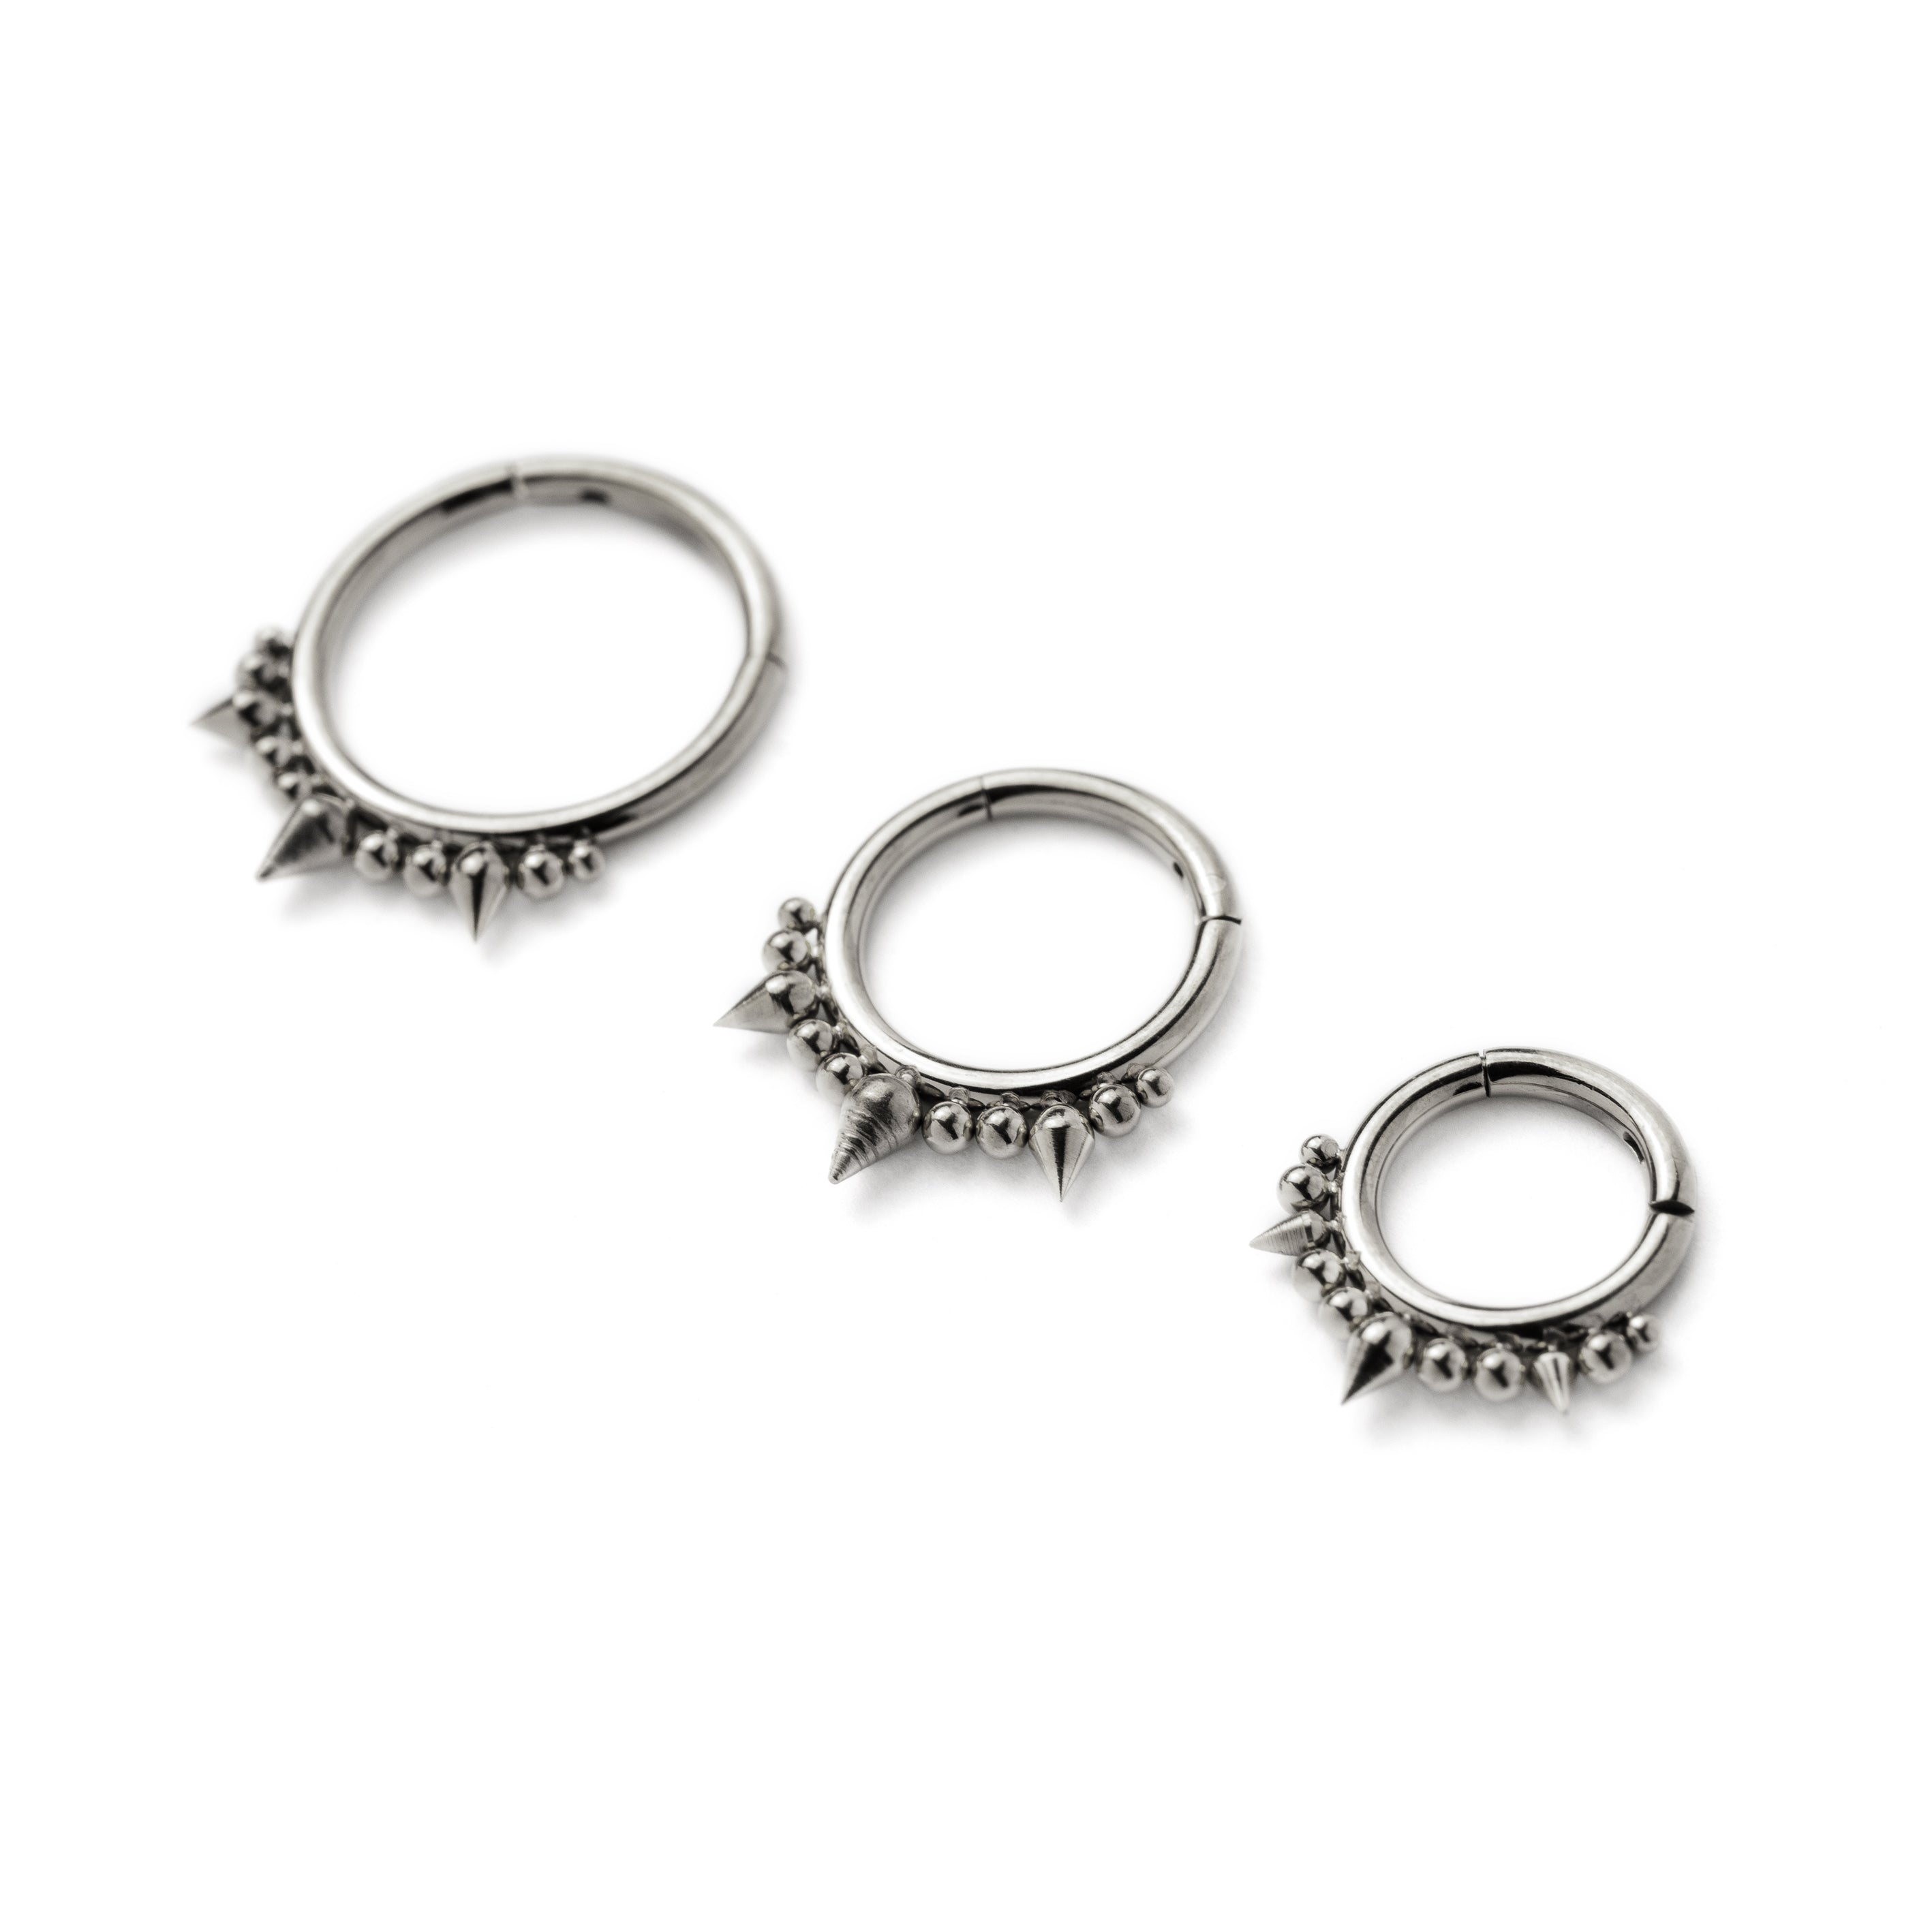 6mm, 8mm and 10mm Debra surgical steel septum clicker ring right side view